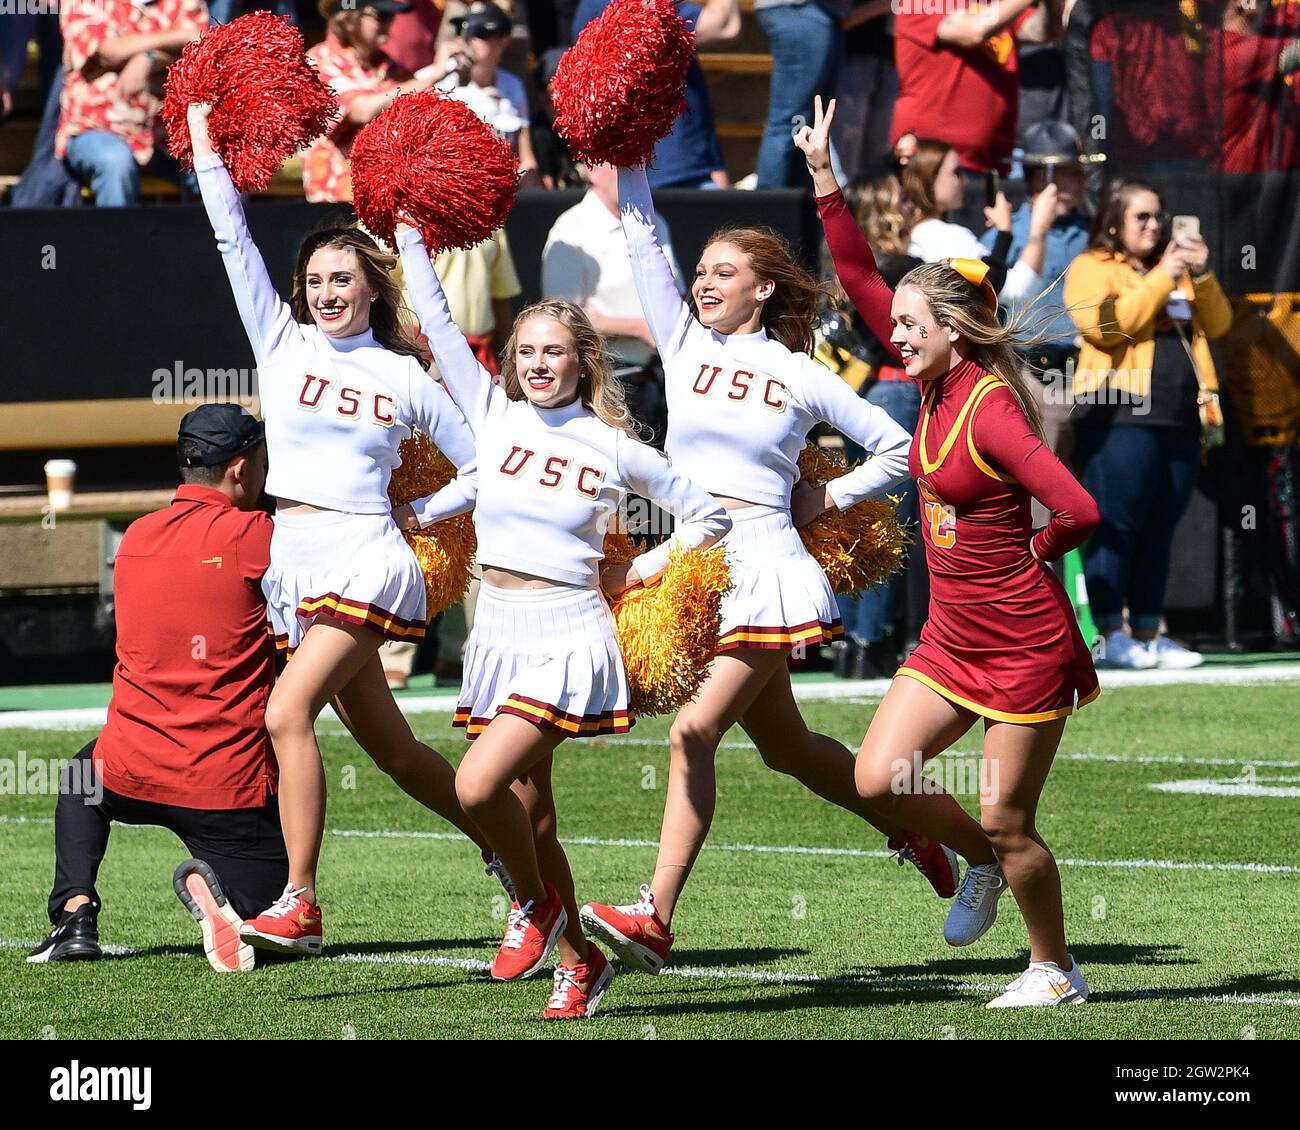 Boulder, CO, USA. 02nd Oct, 2021. USC cheerleaders run on the field before the football game between Colorado and USC at Folsom Field in Boulder, CO. Colorado lost 37-14. Derek Regensburger/CSM/Alamy Live News Stock Photo